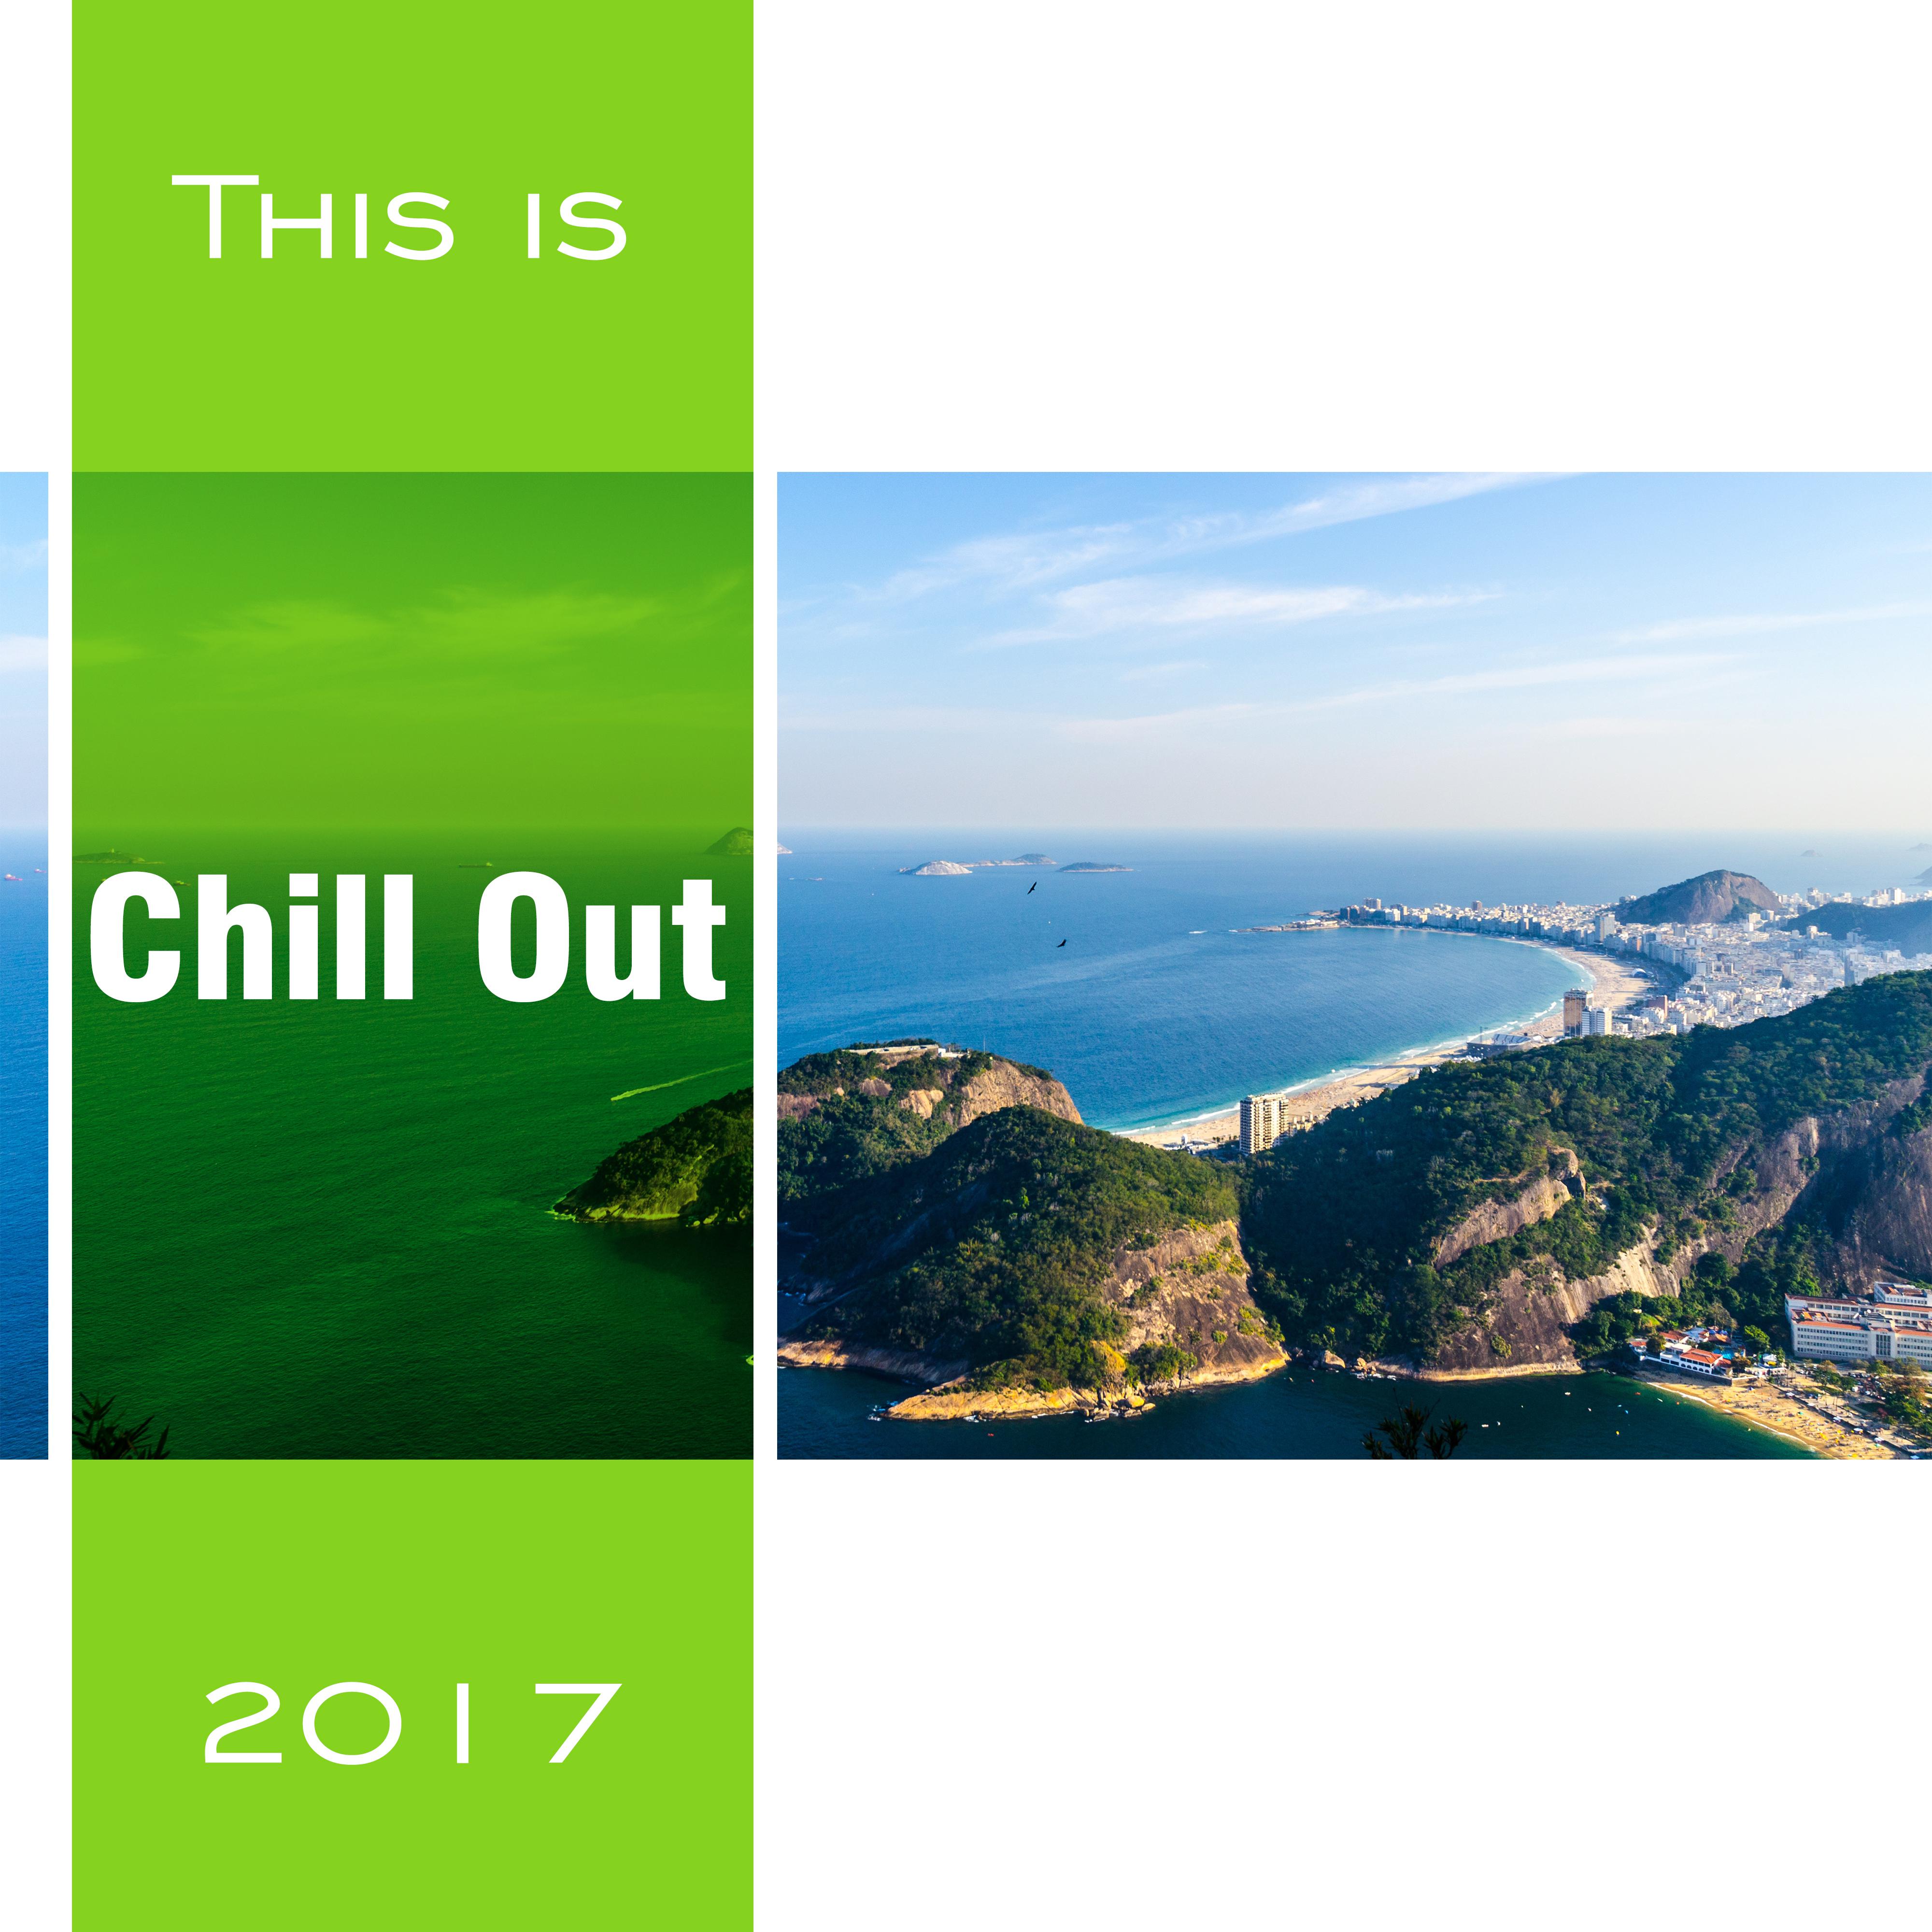 This is Chill Out 2017 – Hot Party Ibiza, Summertime, Holiday Music, *** on the Beach